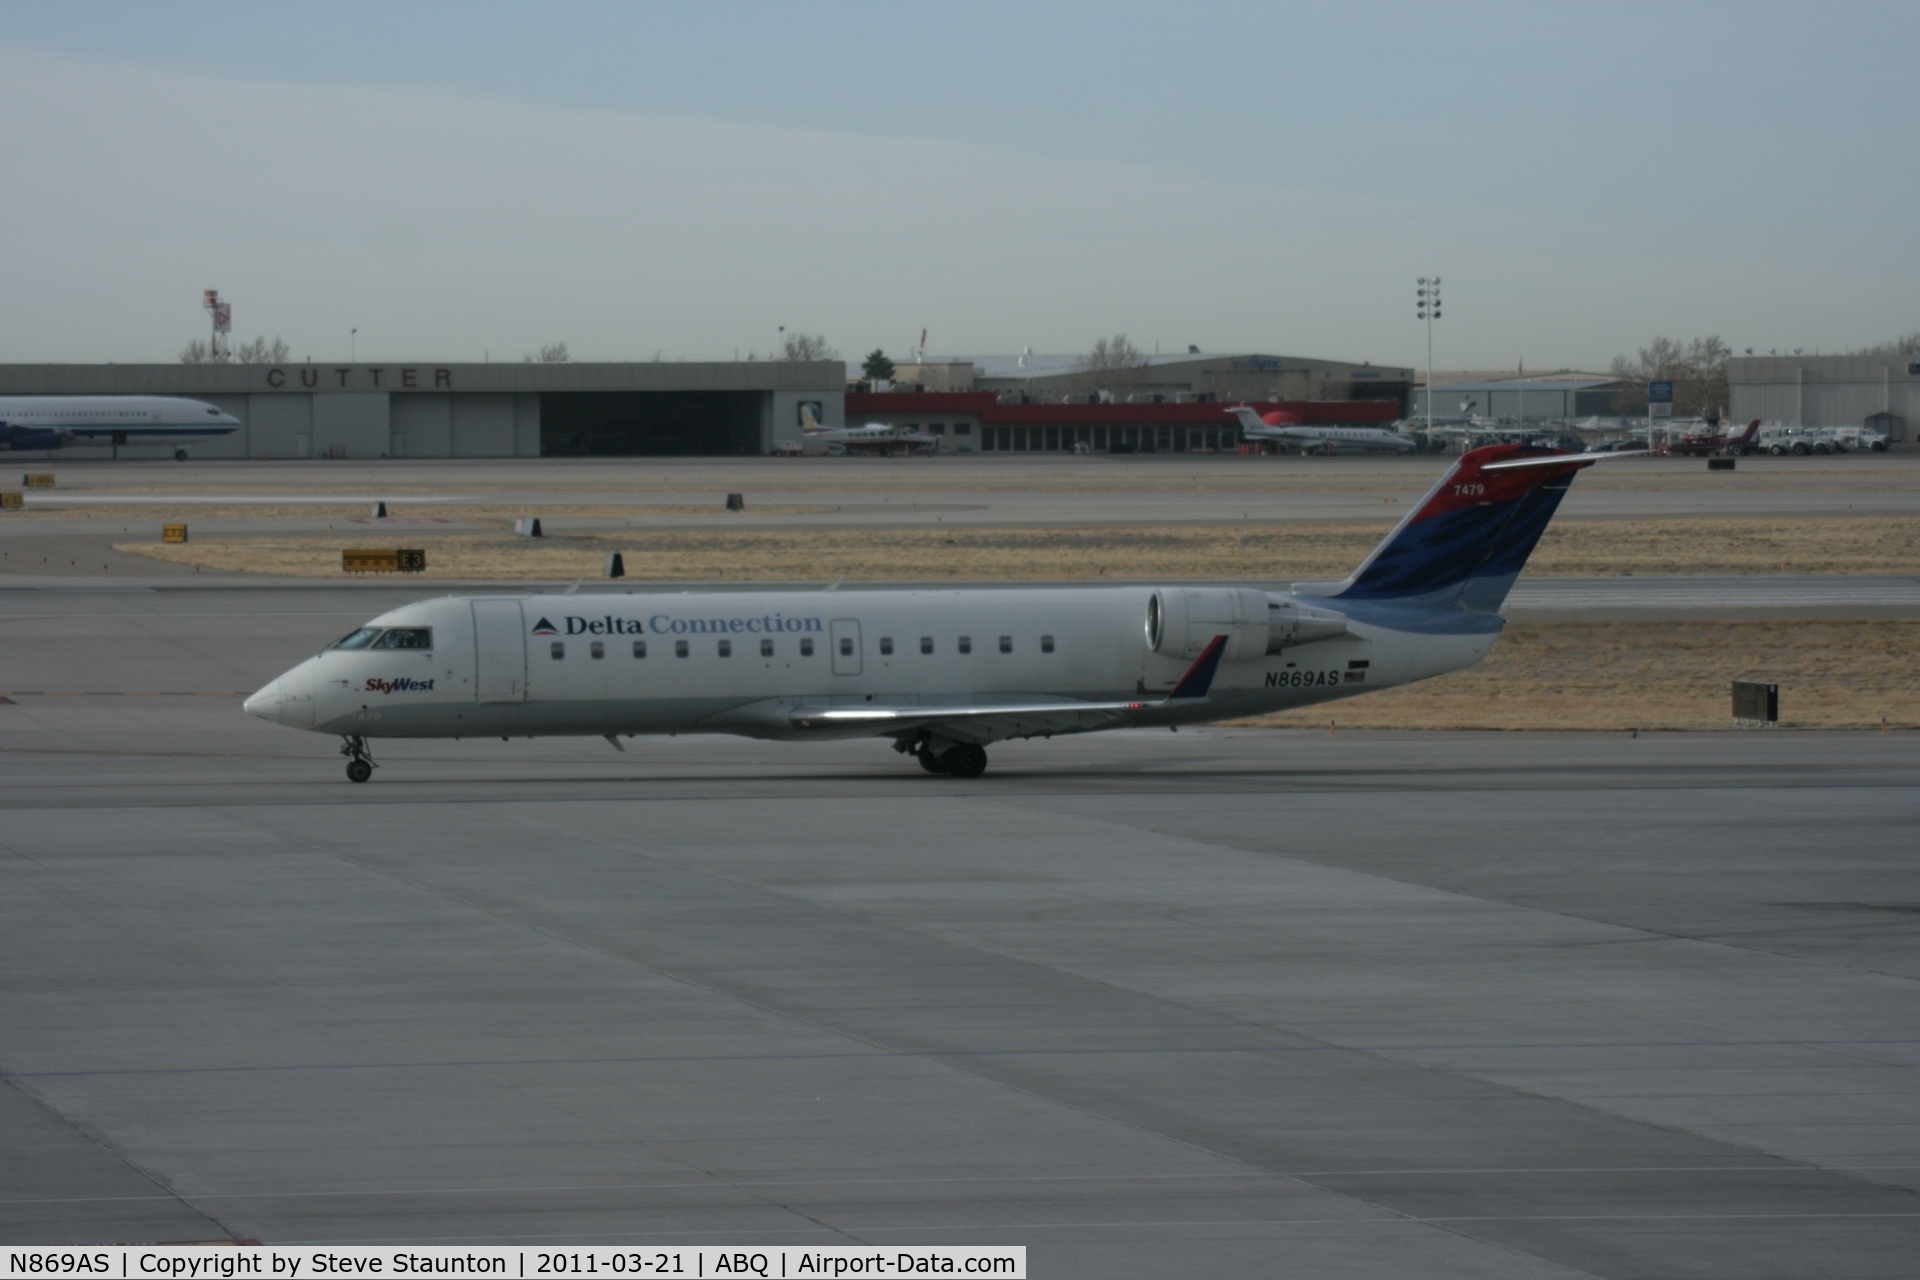 N869AS, 2001 Bombardier CRJ-200ER (CL-600-2B19) C/N 7479, Taken at Alburquerque International Sunport Airport, New Mexico in March 2011 whilst on an Aeroprint Aviation tour